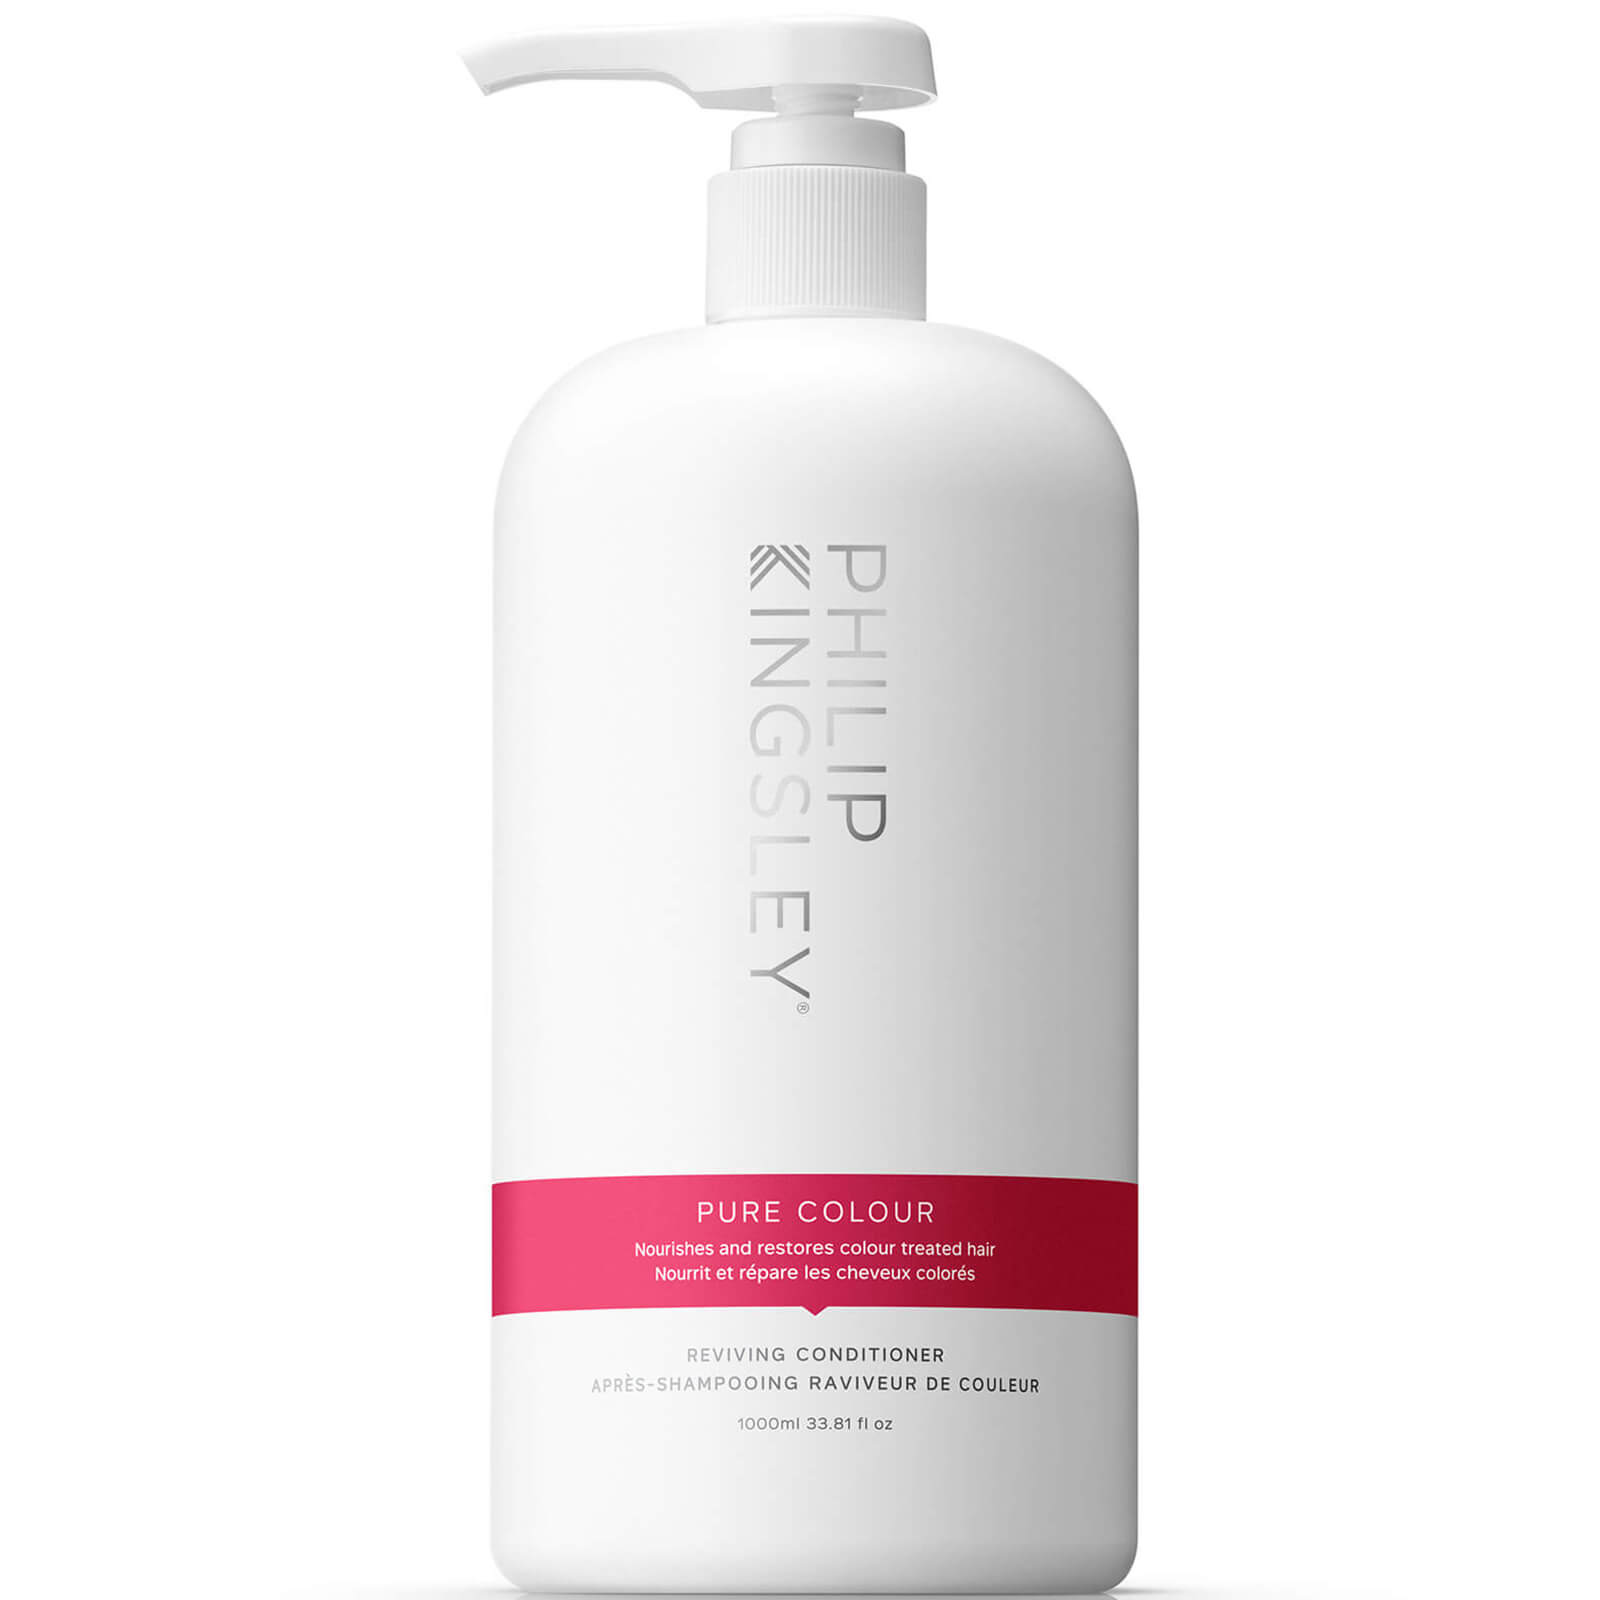 Image of Philip Kingsley Pure Colour Reviving Conditioner 1000ml